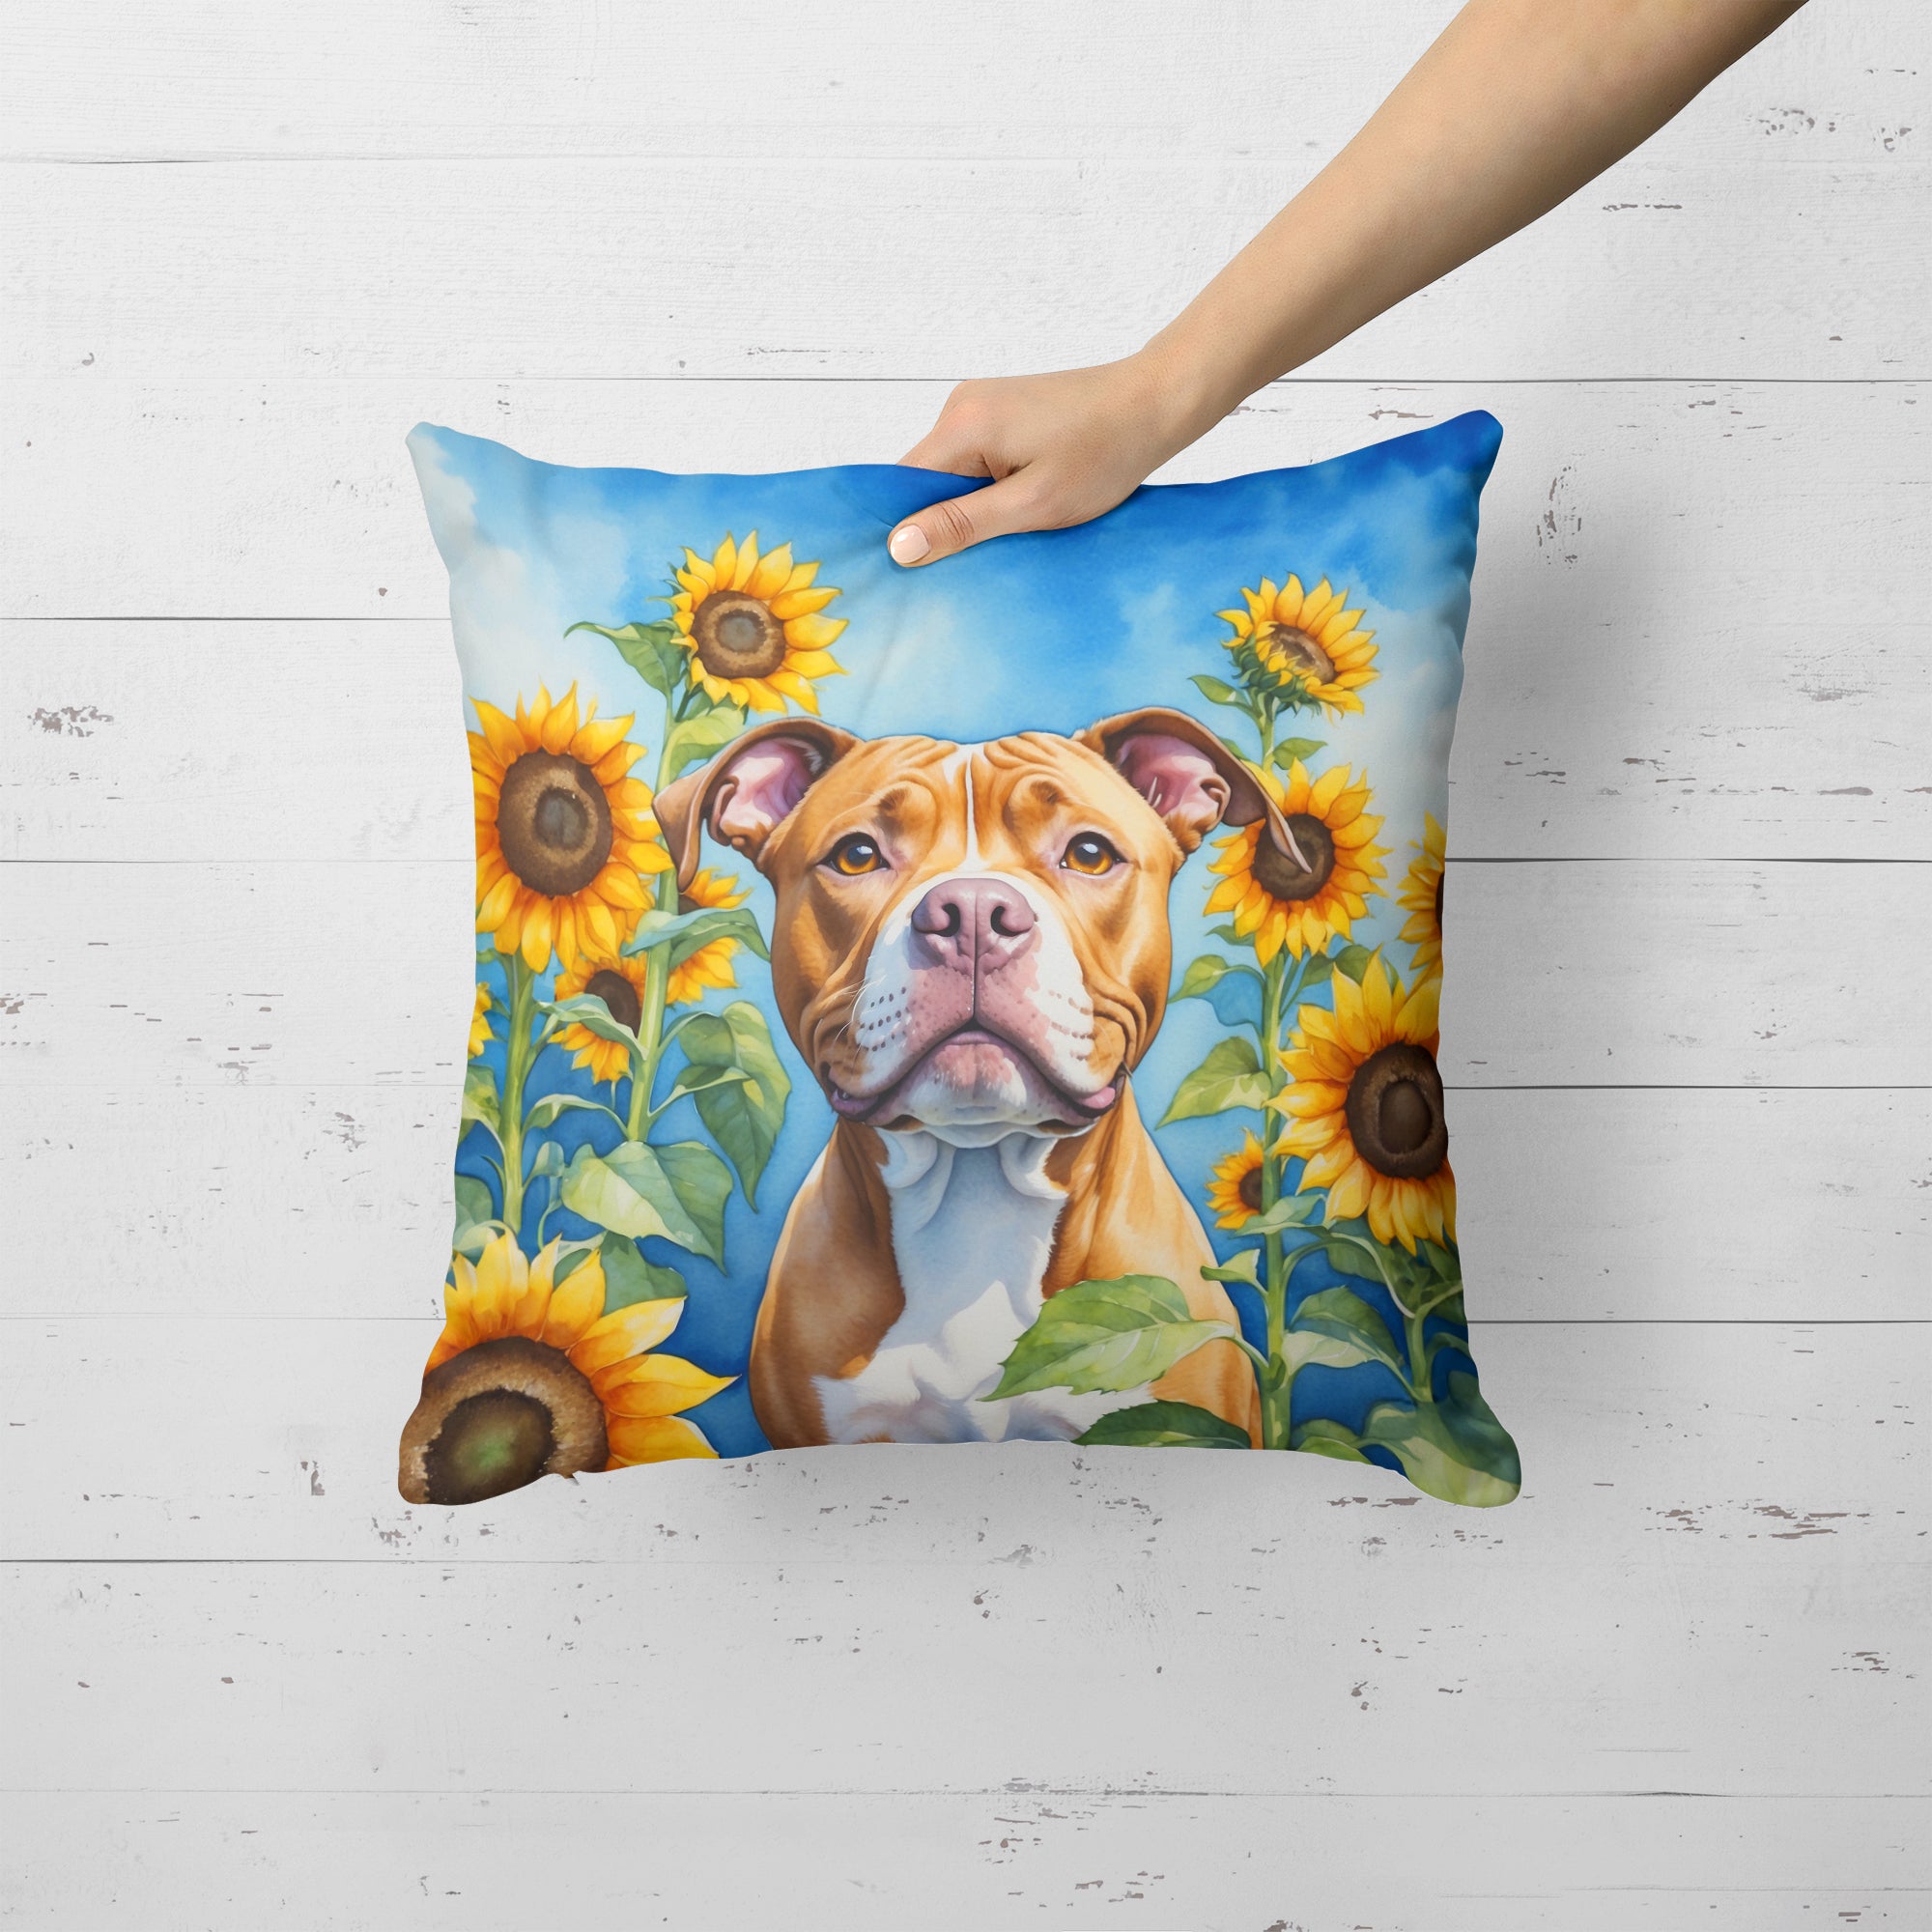 Buy this Pit Bull Terrier in Sunflowers Throw Pillow